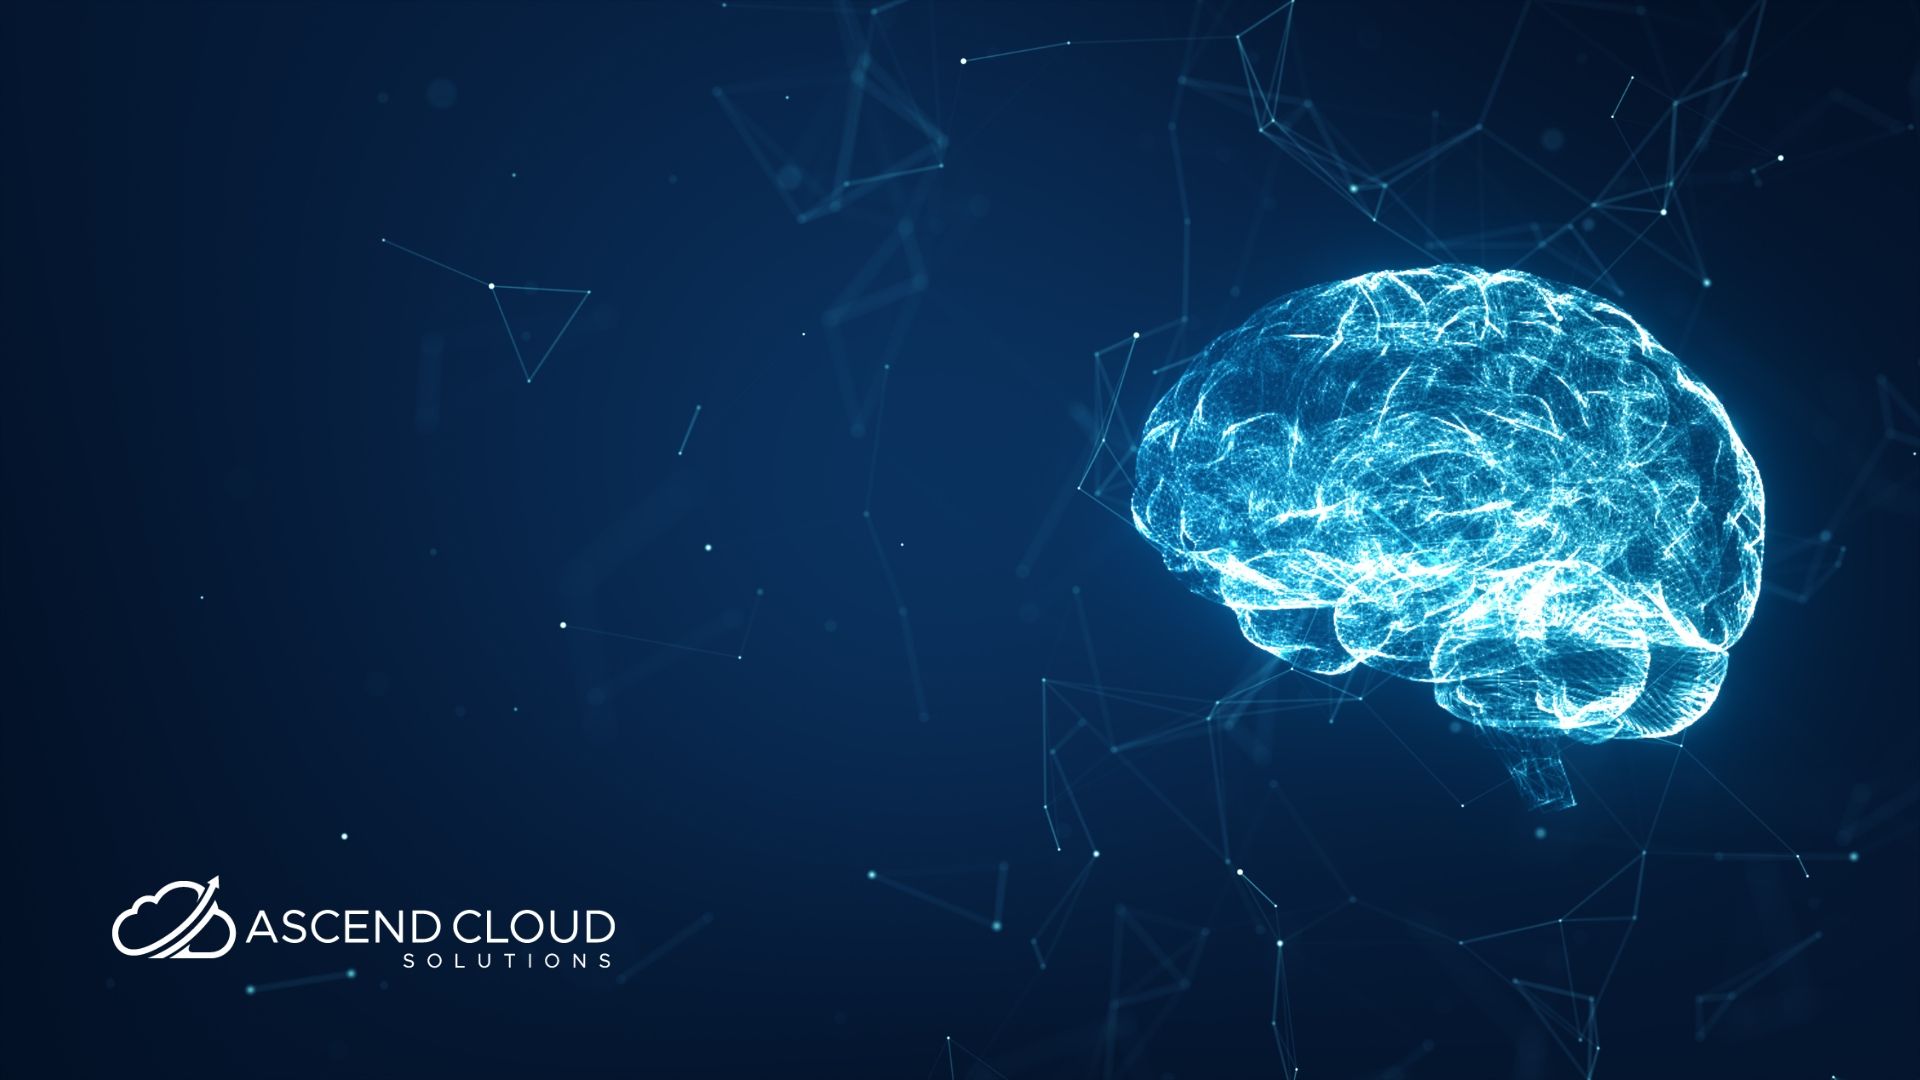 How do cloud technologies leverage artificial intelligence (AI) and machine learning (ML)? Learn about some innovative use cases in our guide.